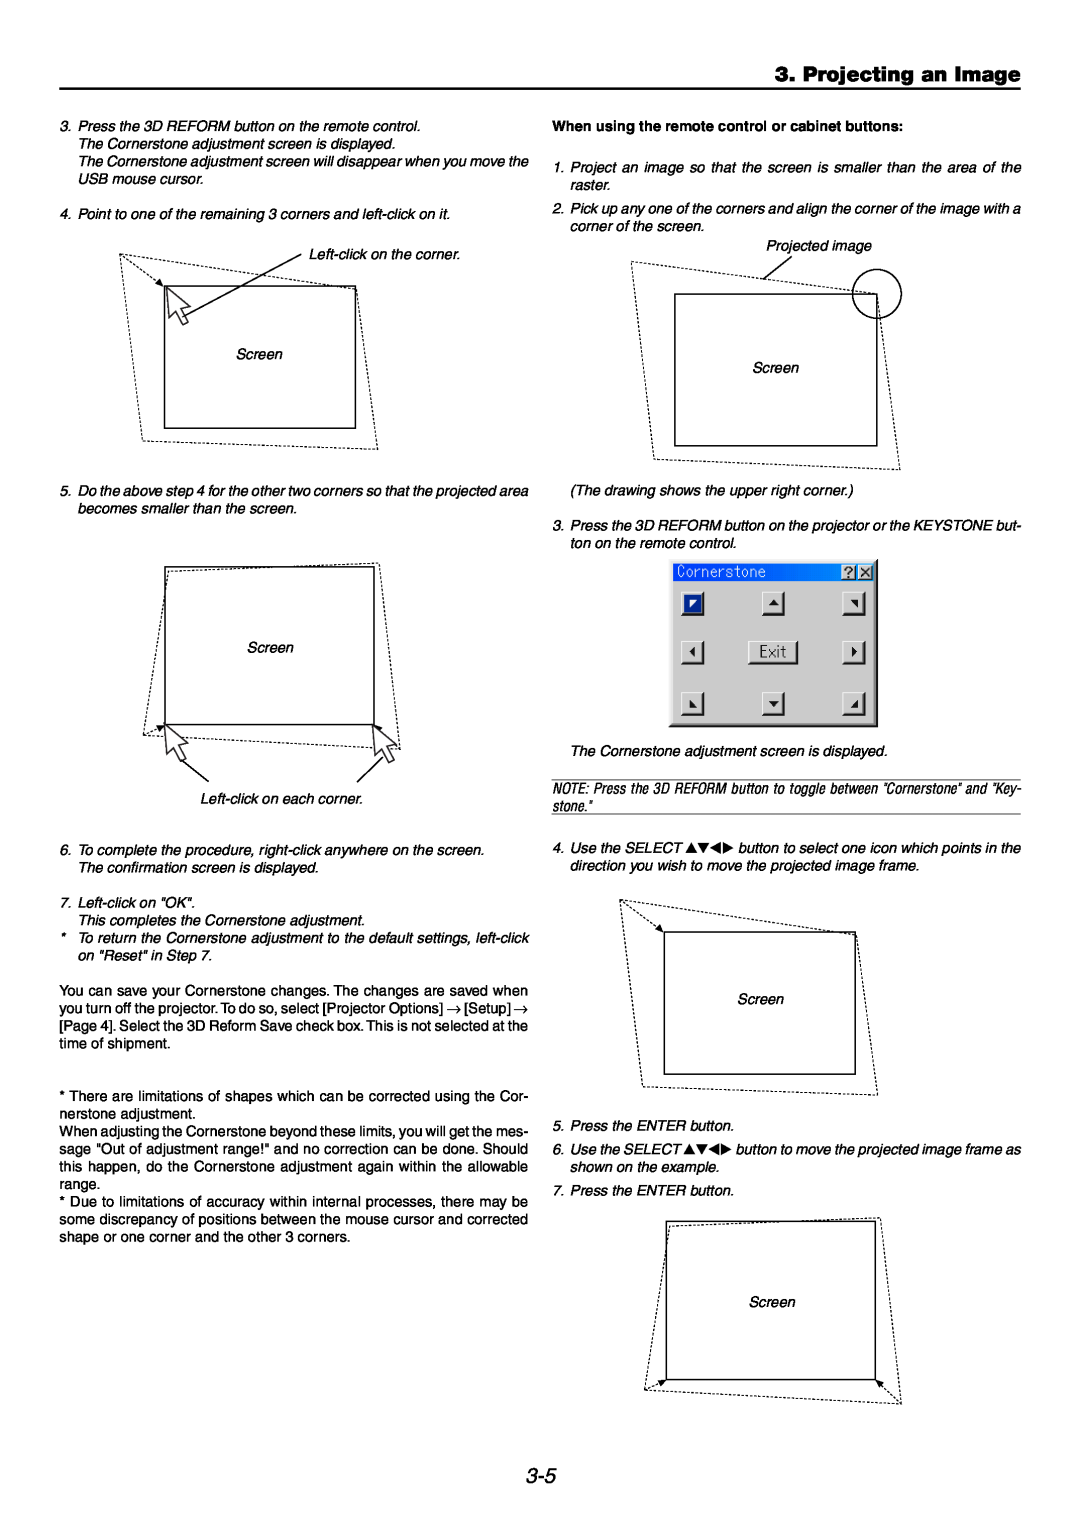 NEC GT6000 user manual Projecting an Image, When using the remote control or cabinet buttons 